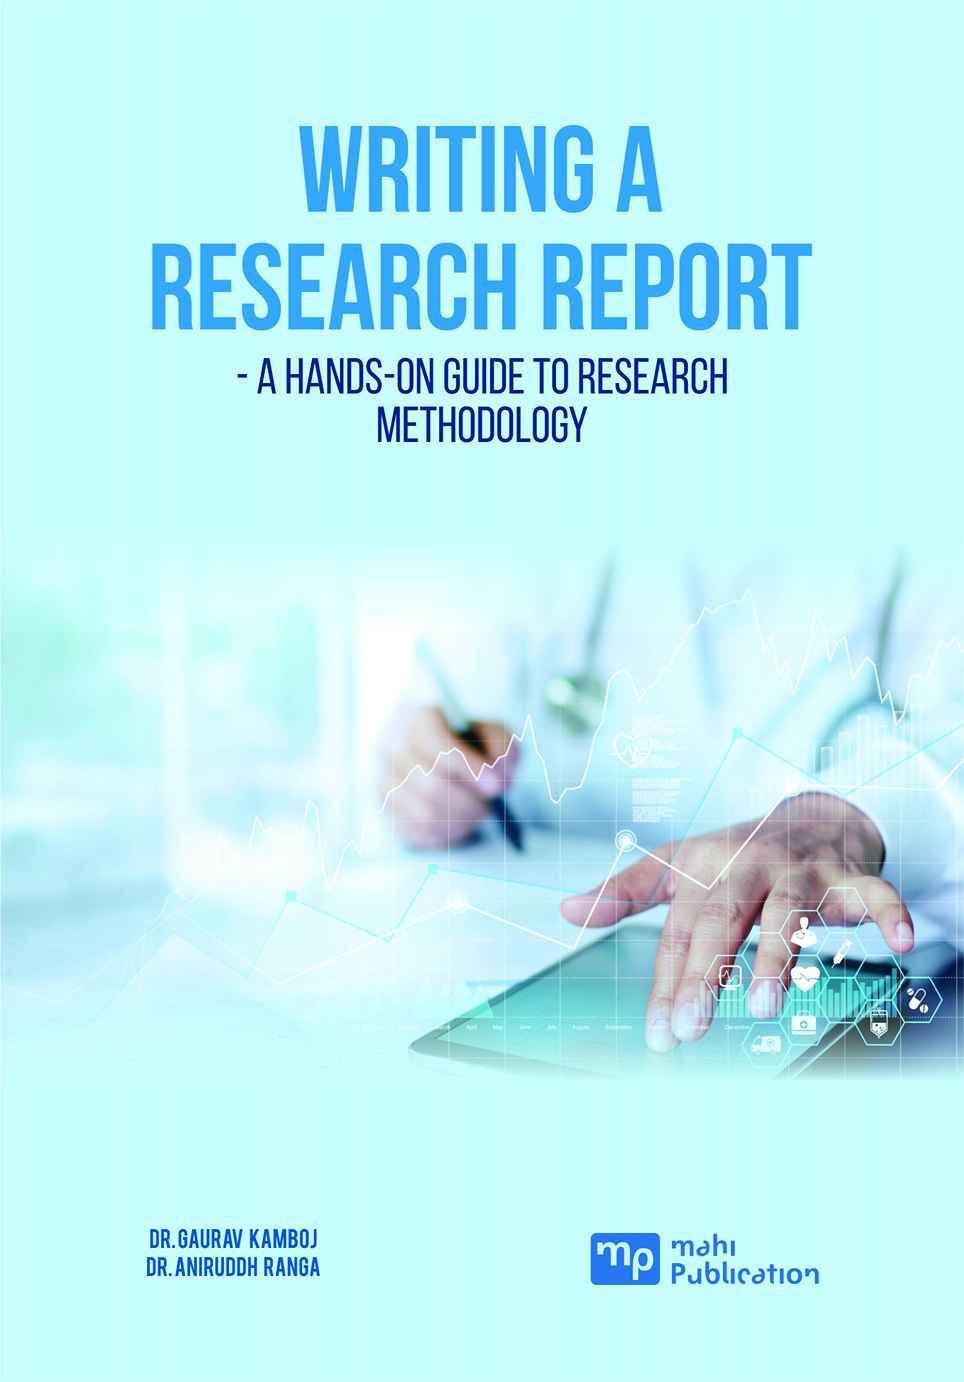 Writing a Research Report -A Hands-on Guide to Research Methodology